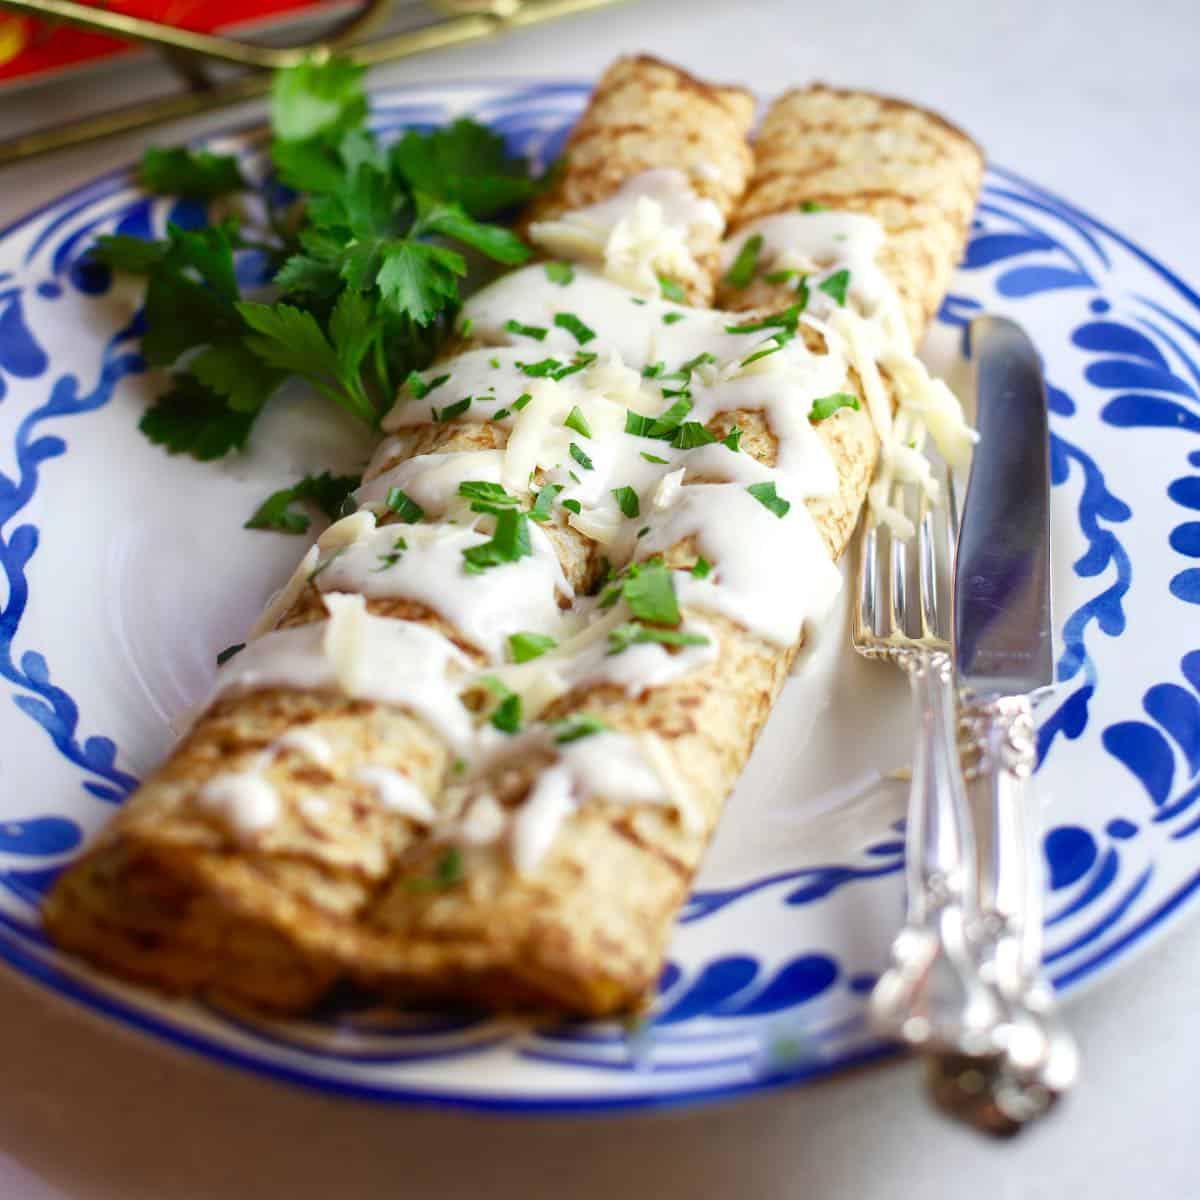 Two chicken and mushroom crepes topped with mornay sauce on a blue and white plate.